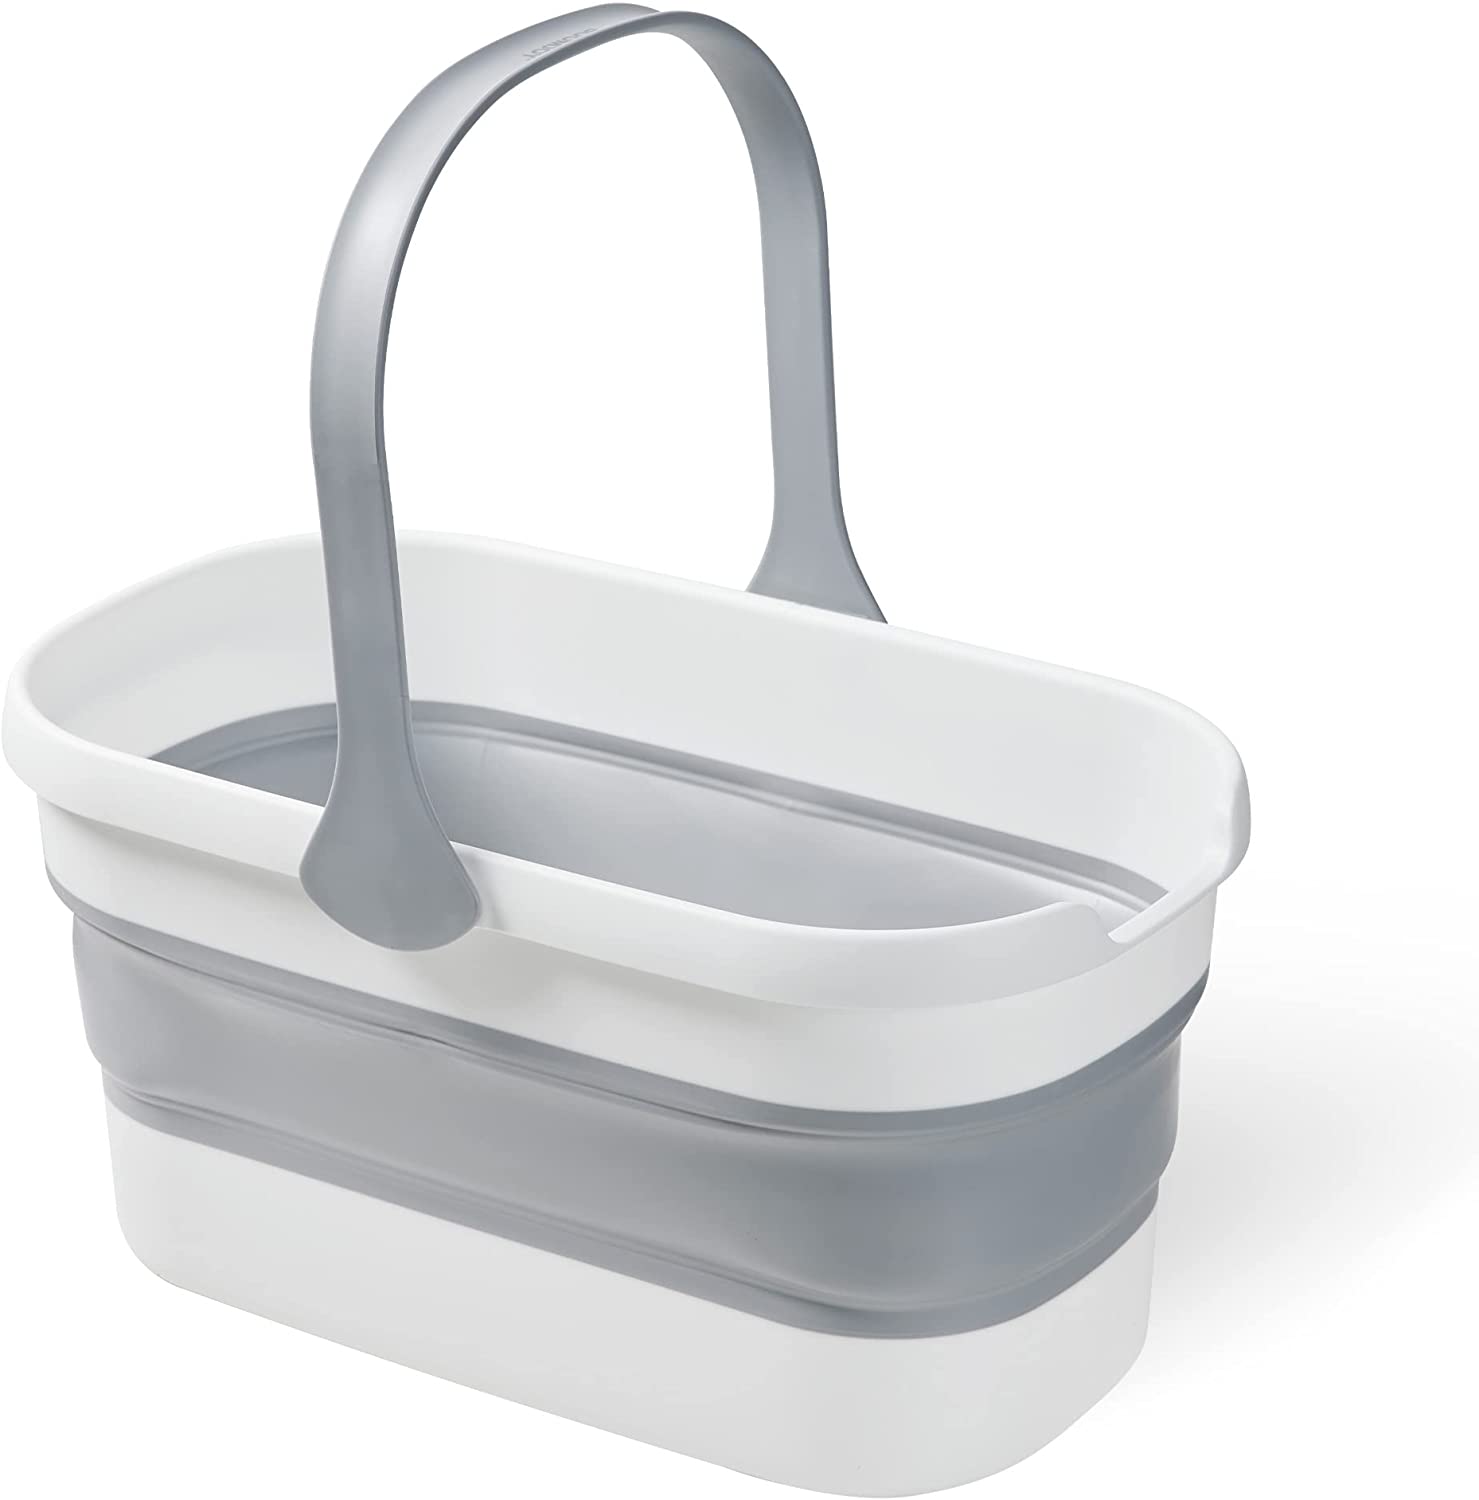 Folding Bucket in white color